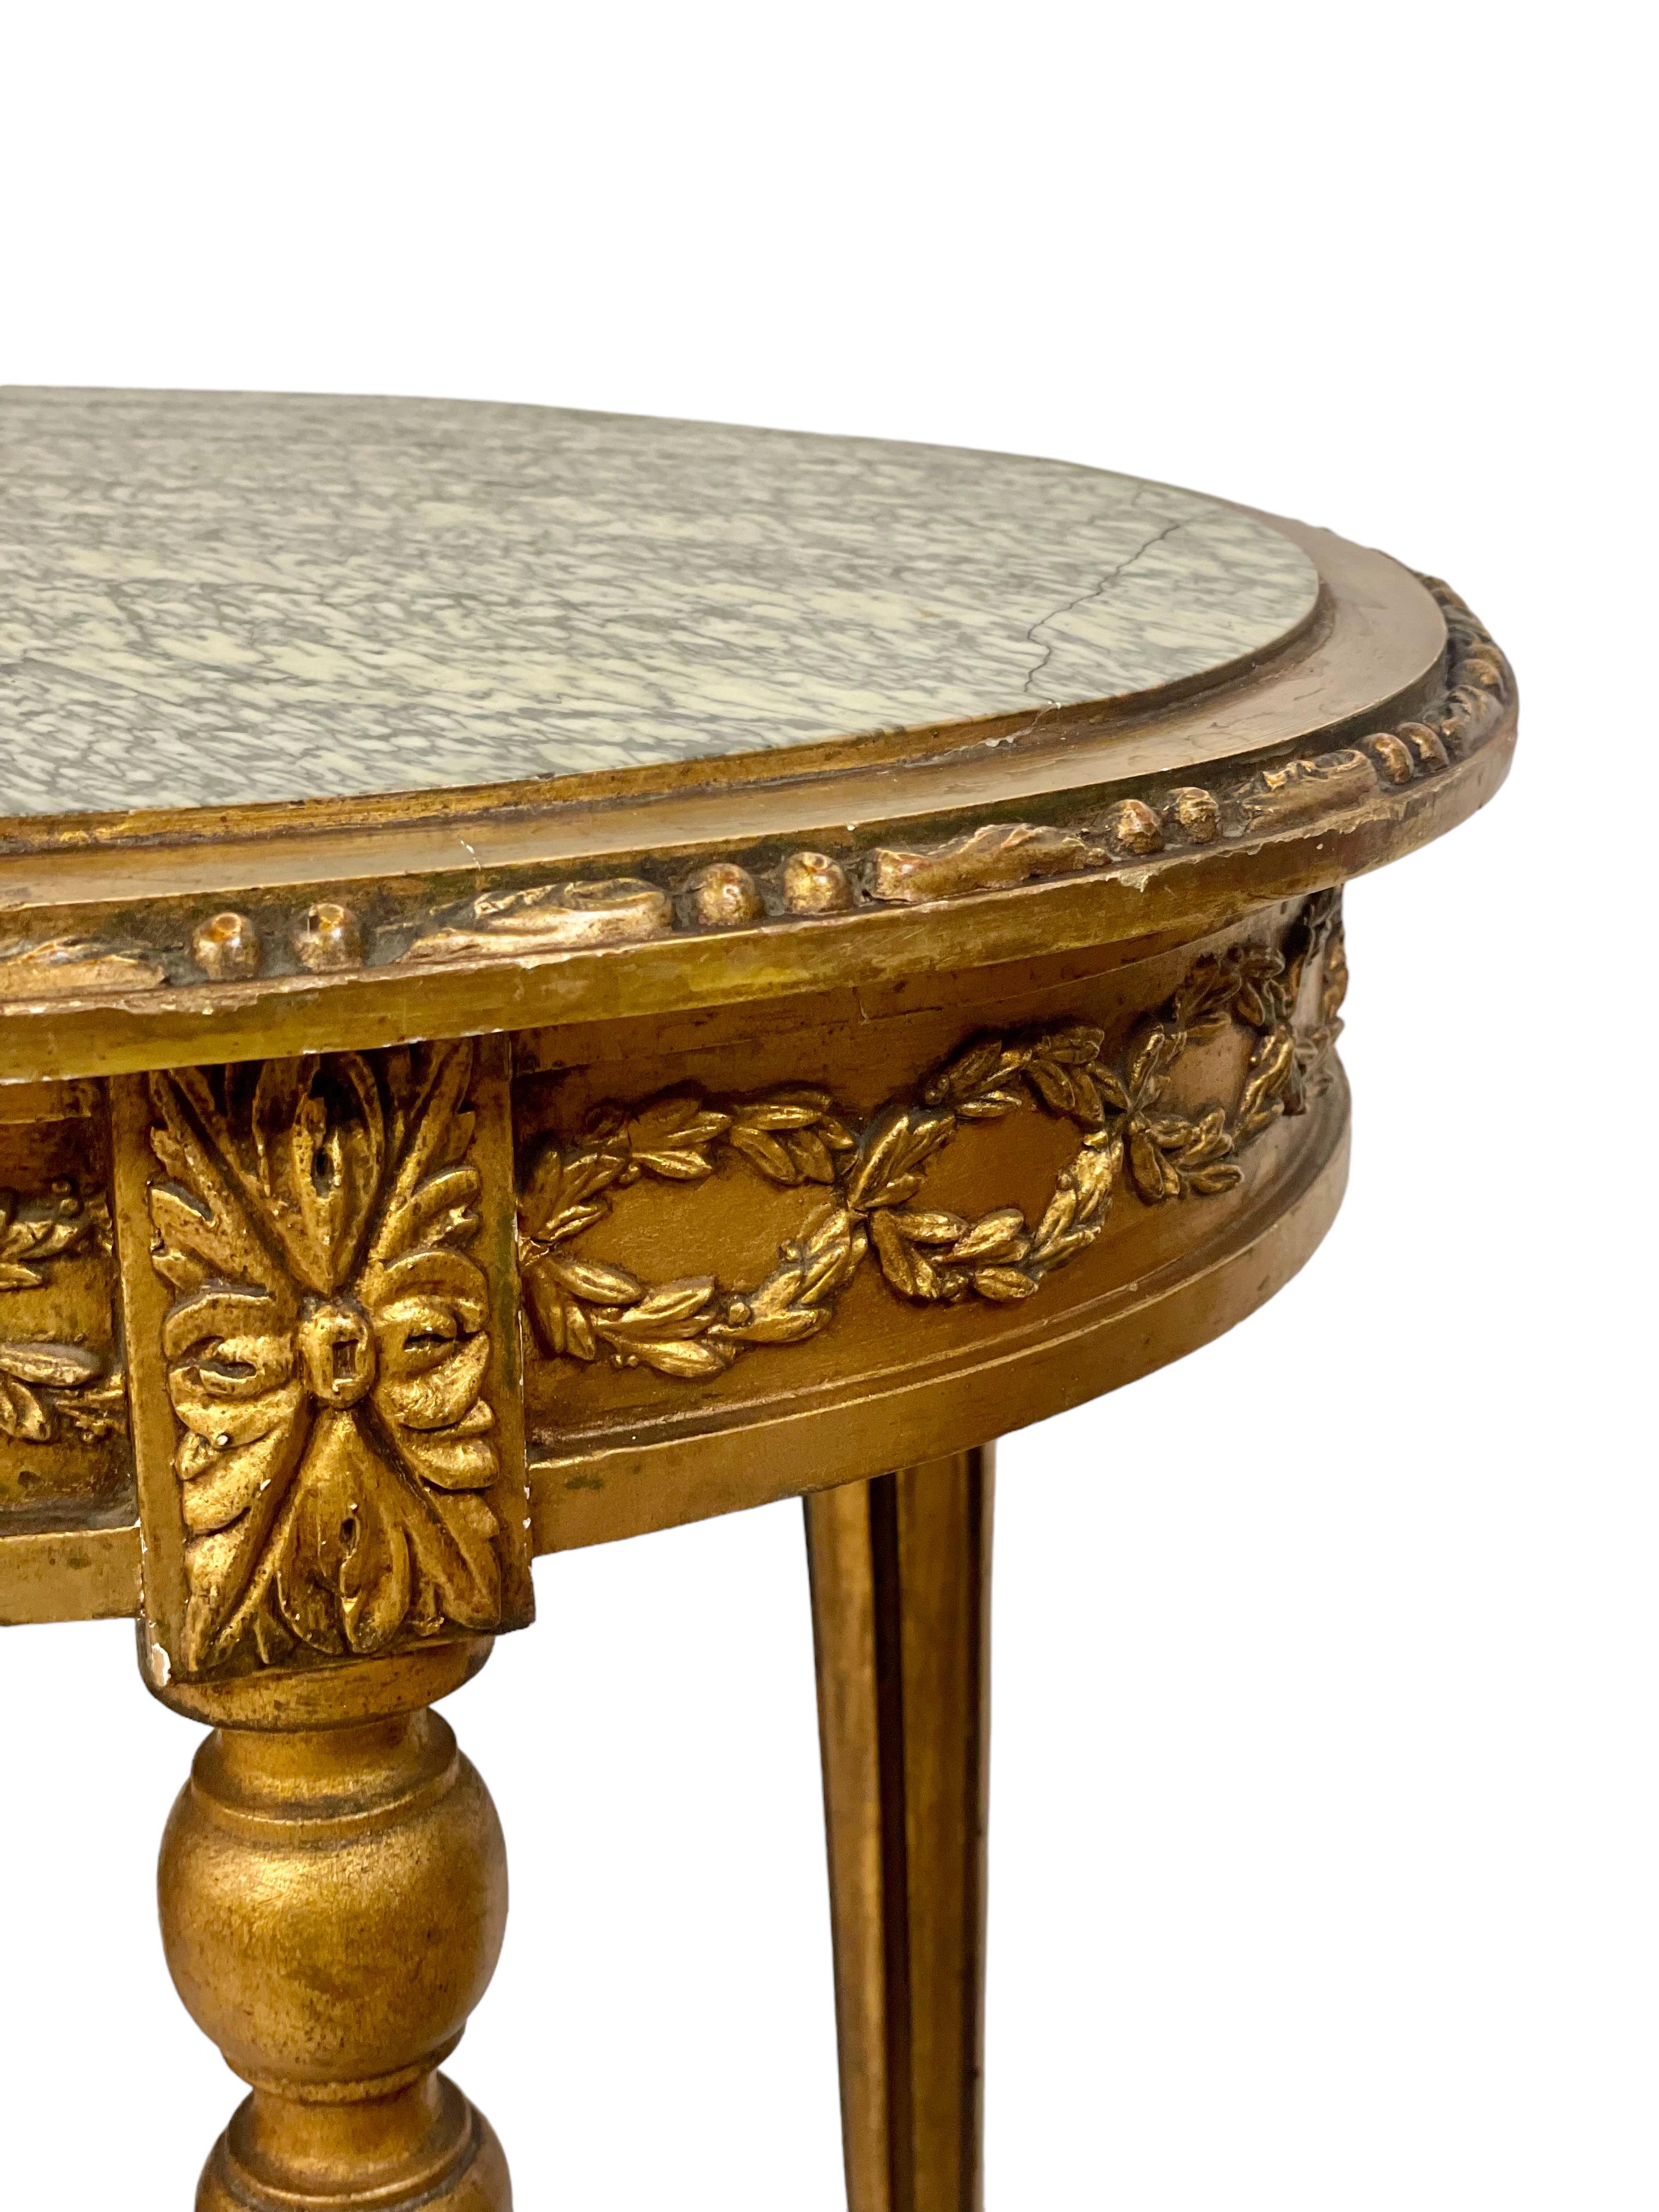 19th Century French Louis XVI Gilt Center Table with Marble Top For Sale 5